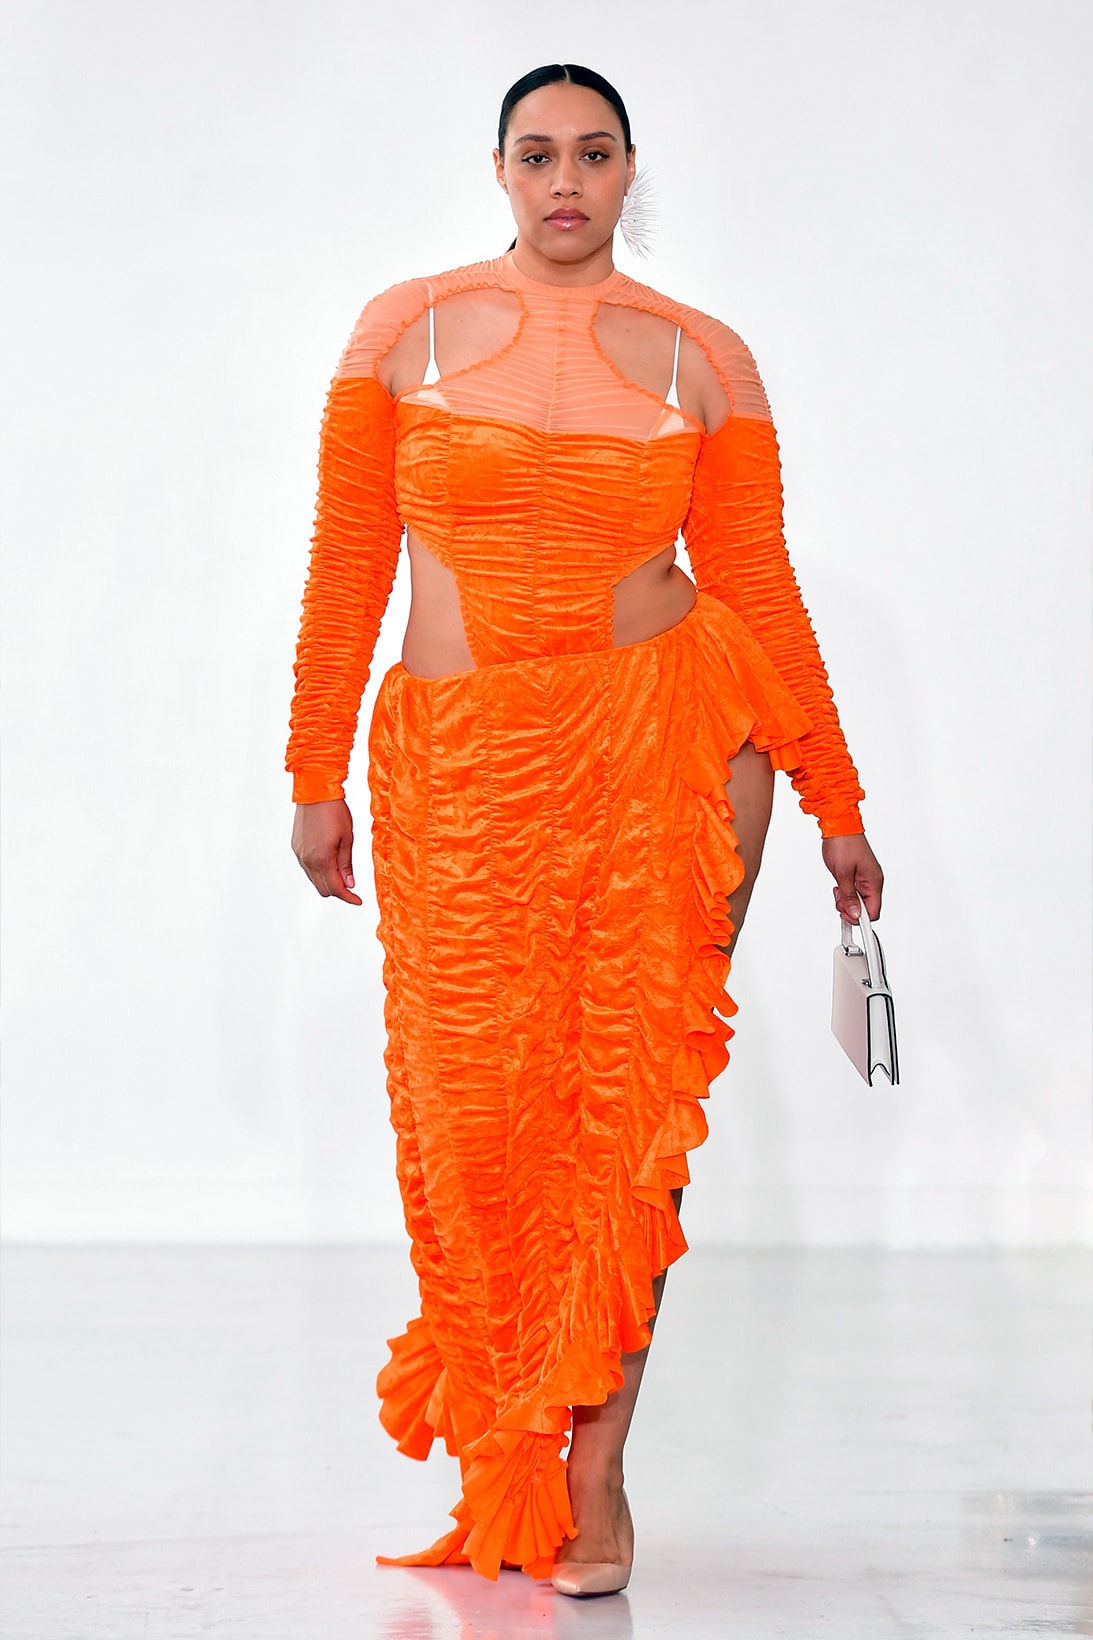 Ester Manas Fall Winter Collection Size Inclusivity Cut-Outs Fashion Week Runway Show Photos One-Piece Dress Orange